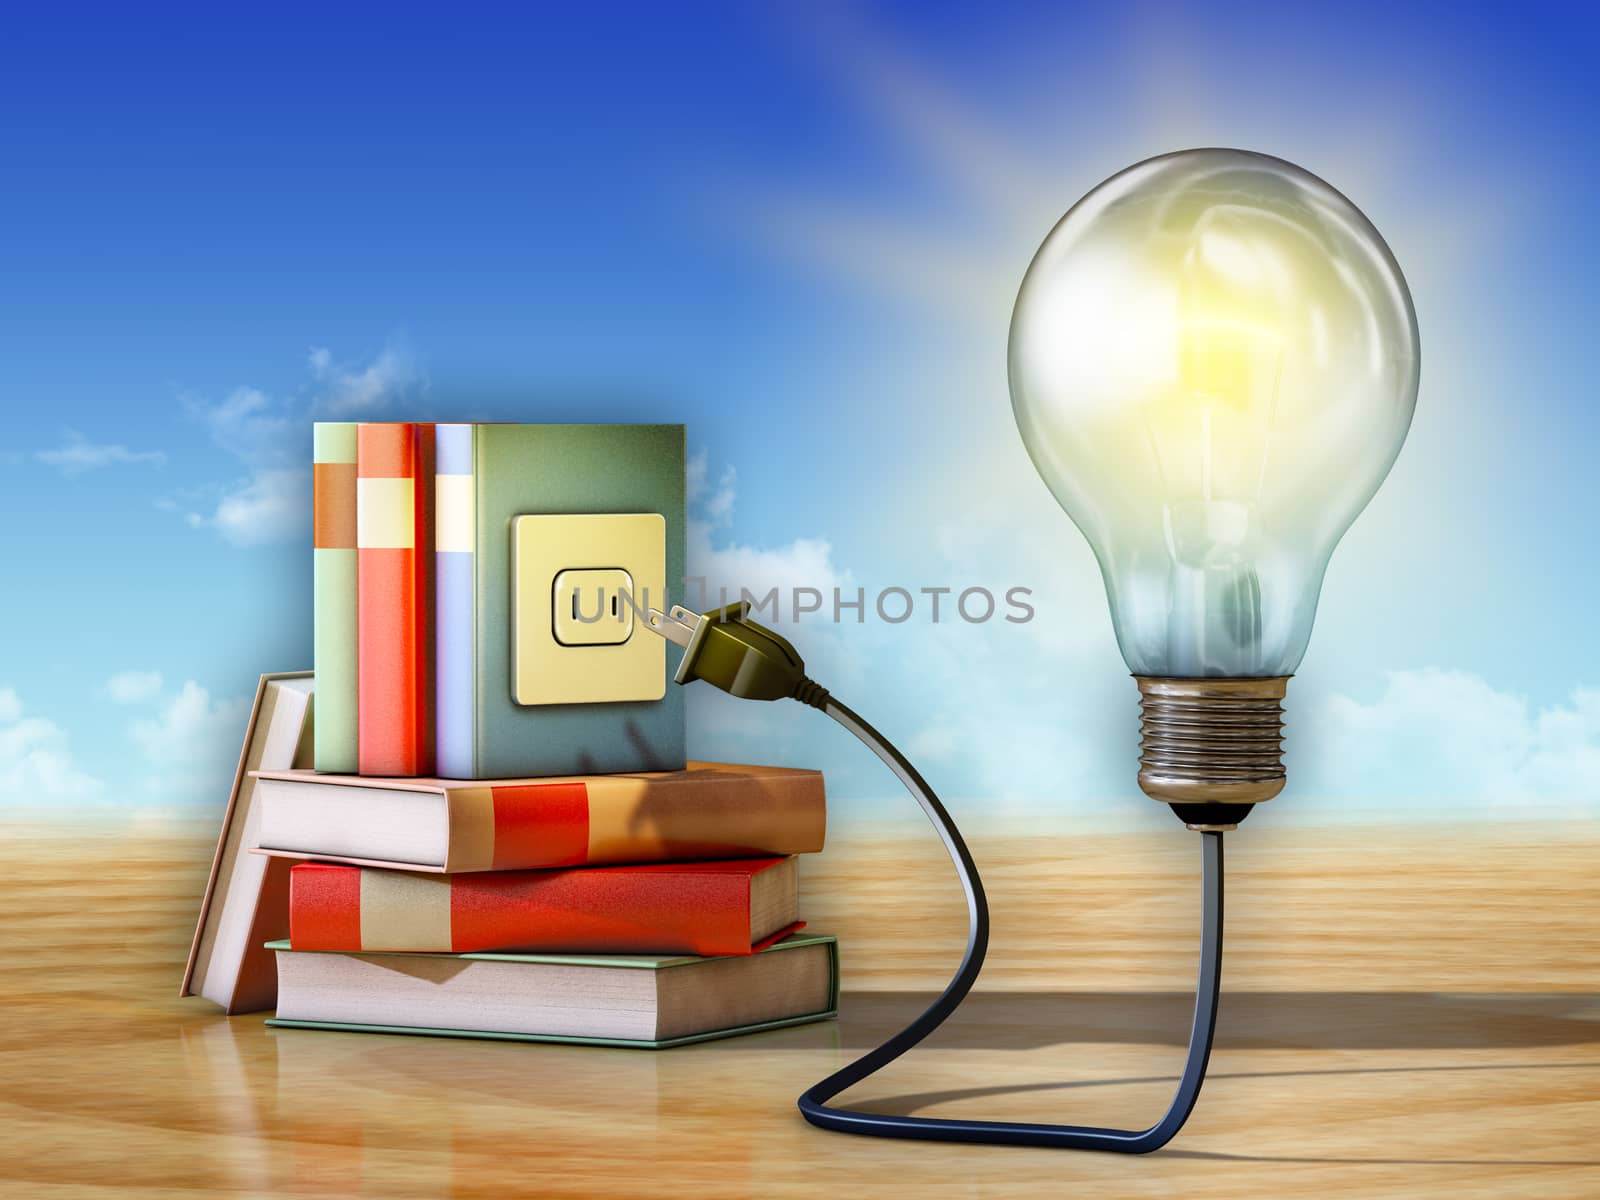 Knowledge and ideas by Andreus